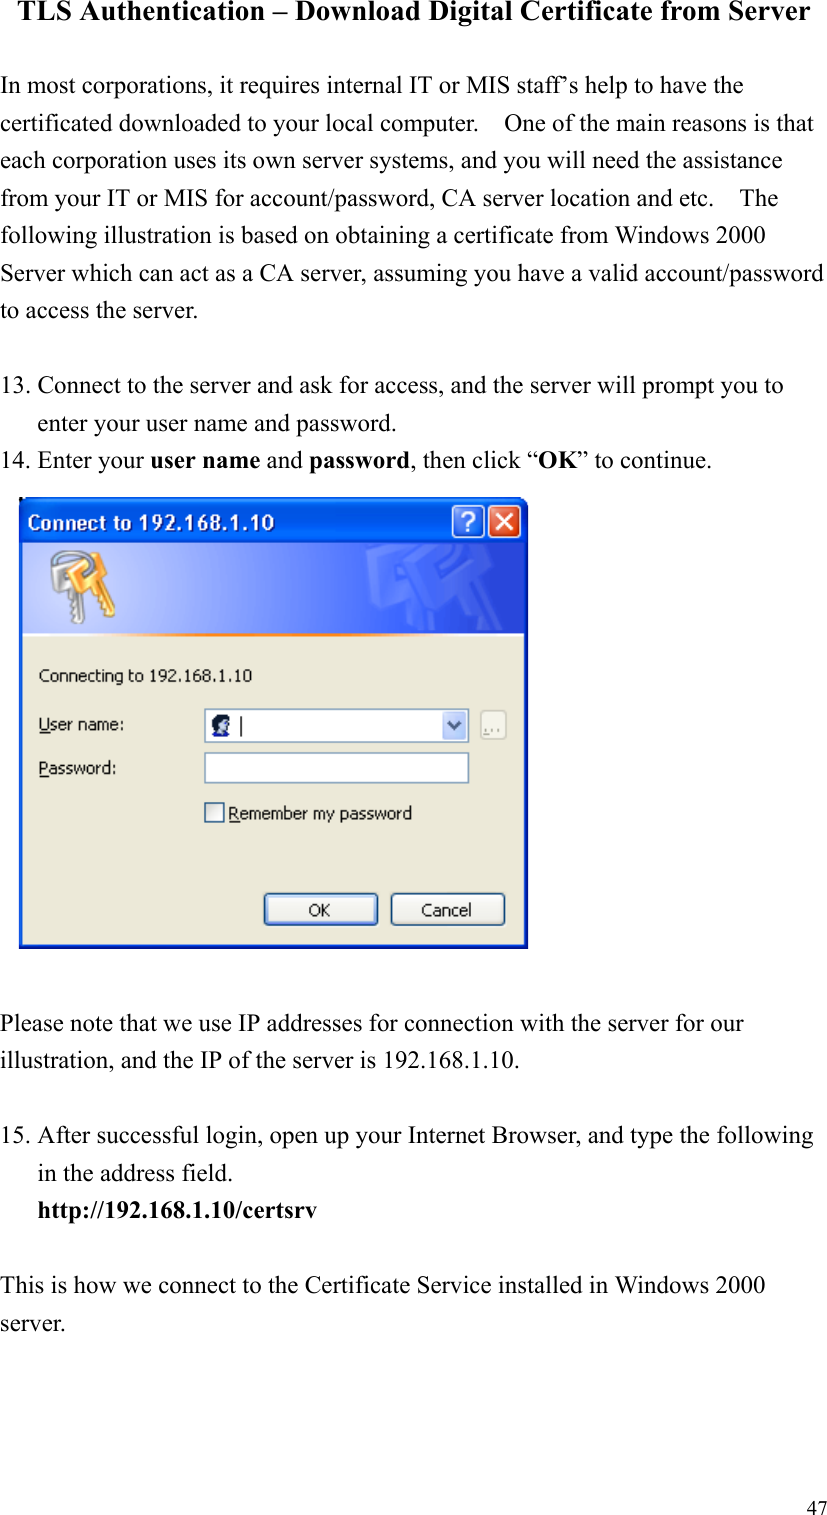 47TLS Authentication – Download Digital Certificate from ServerIn most corporations, it requires internal IT or MIS staff’s help to have thecertificated downloaded to your local computer.    One of the main reasons is thateach corporation uses its own server systems, and you will need the assistancefrom your IT or MIS for account/password, CA server location and etc.    Thefollowing illustration is based on obtaining a certificate from Windows 2000Server which can act as a CA server, assuming you have a valid account/passwordto access the server.13. Connect to the server and ask for access, and the server will prompt you toenter your user name and password.14. Enter your user name and password, then click “OK” to continue.Please note that we use IP addresses for connection with the server for ourillustration, and the IP of the server is 192.168.1.10.15. After successful login, open up your Internet Browser, and type the followingin the address field.http://192.168.1.10/certsrvThis is how we connect to the Certificate Service installed in Windows 2000server.